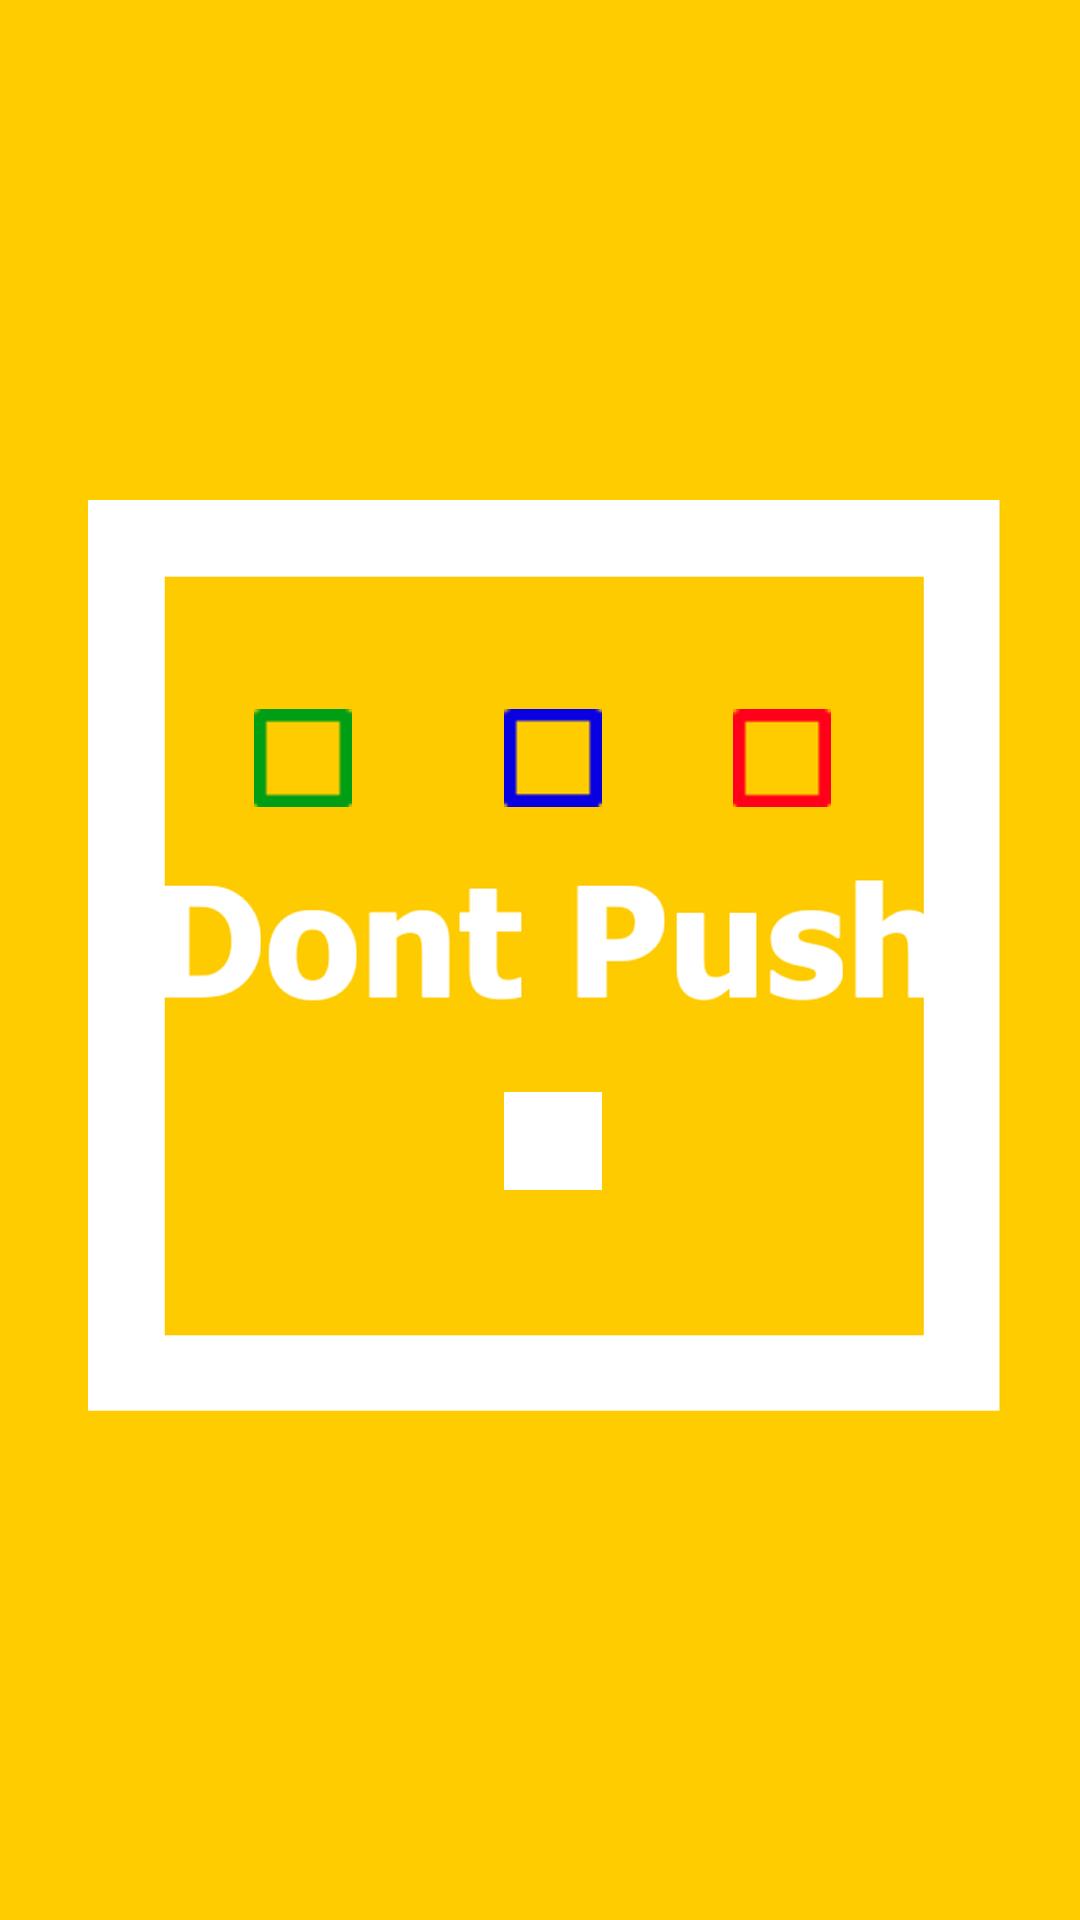 Push one. Dont Push. Don't first Android. Картинка don’t Push me для детей. Push first